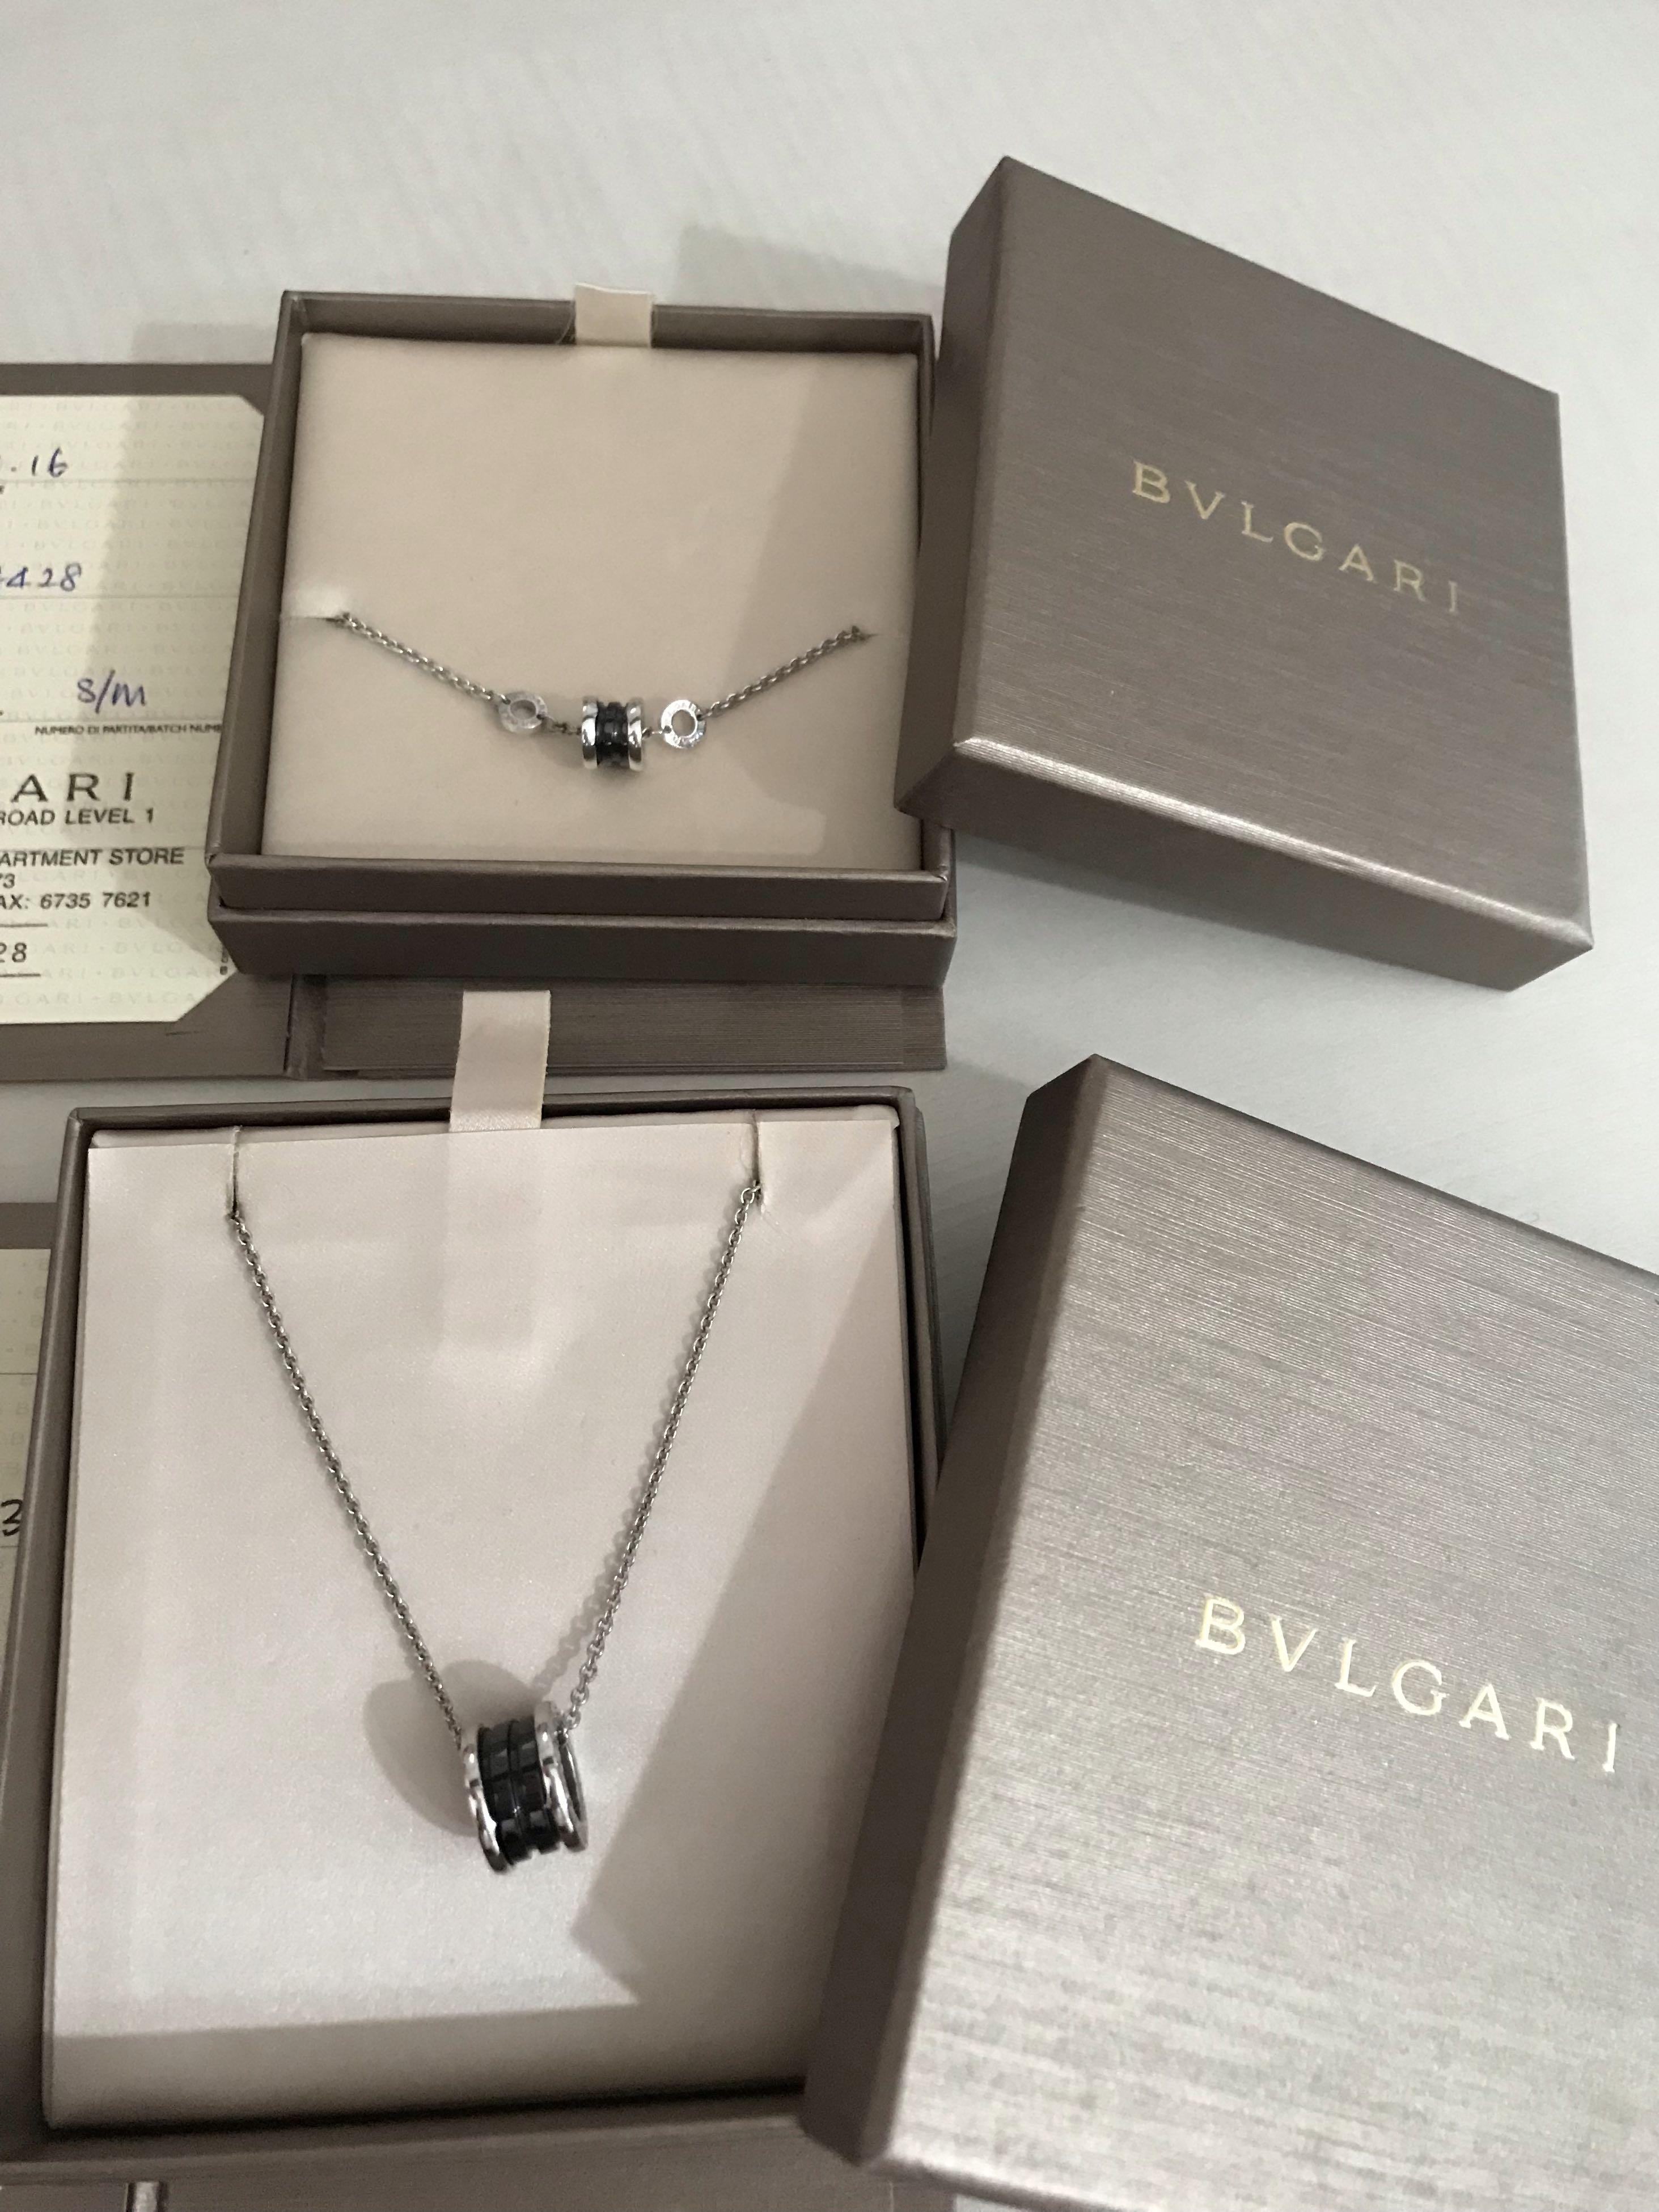 bvlgari save the child necklace gold